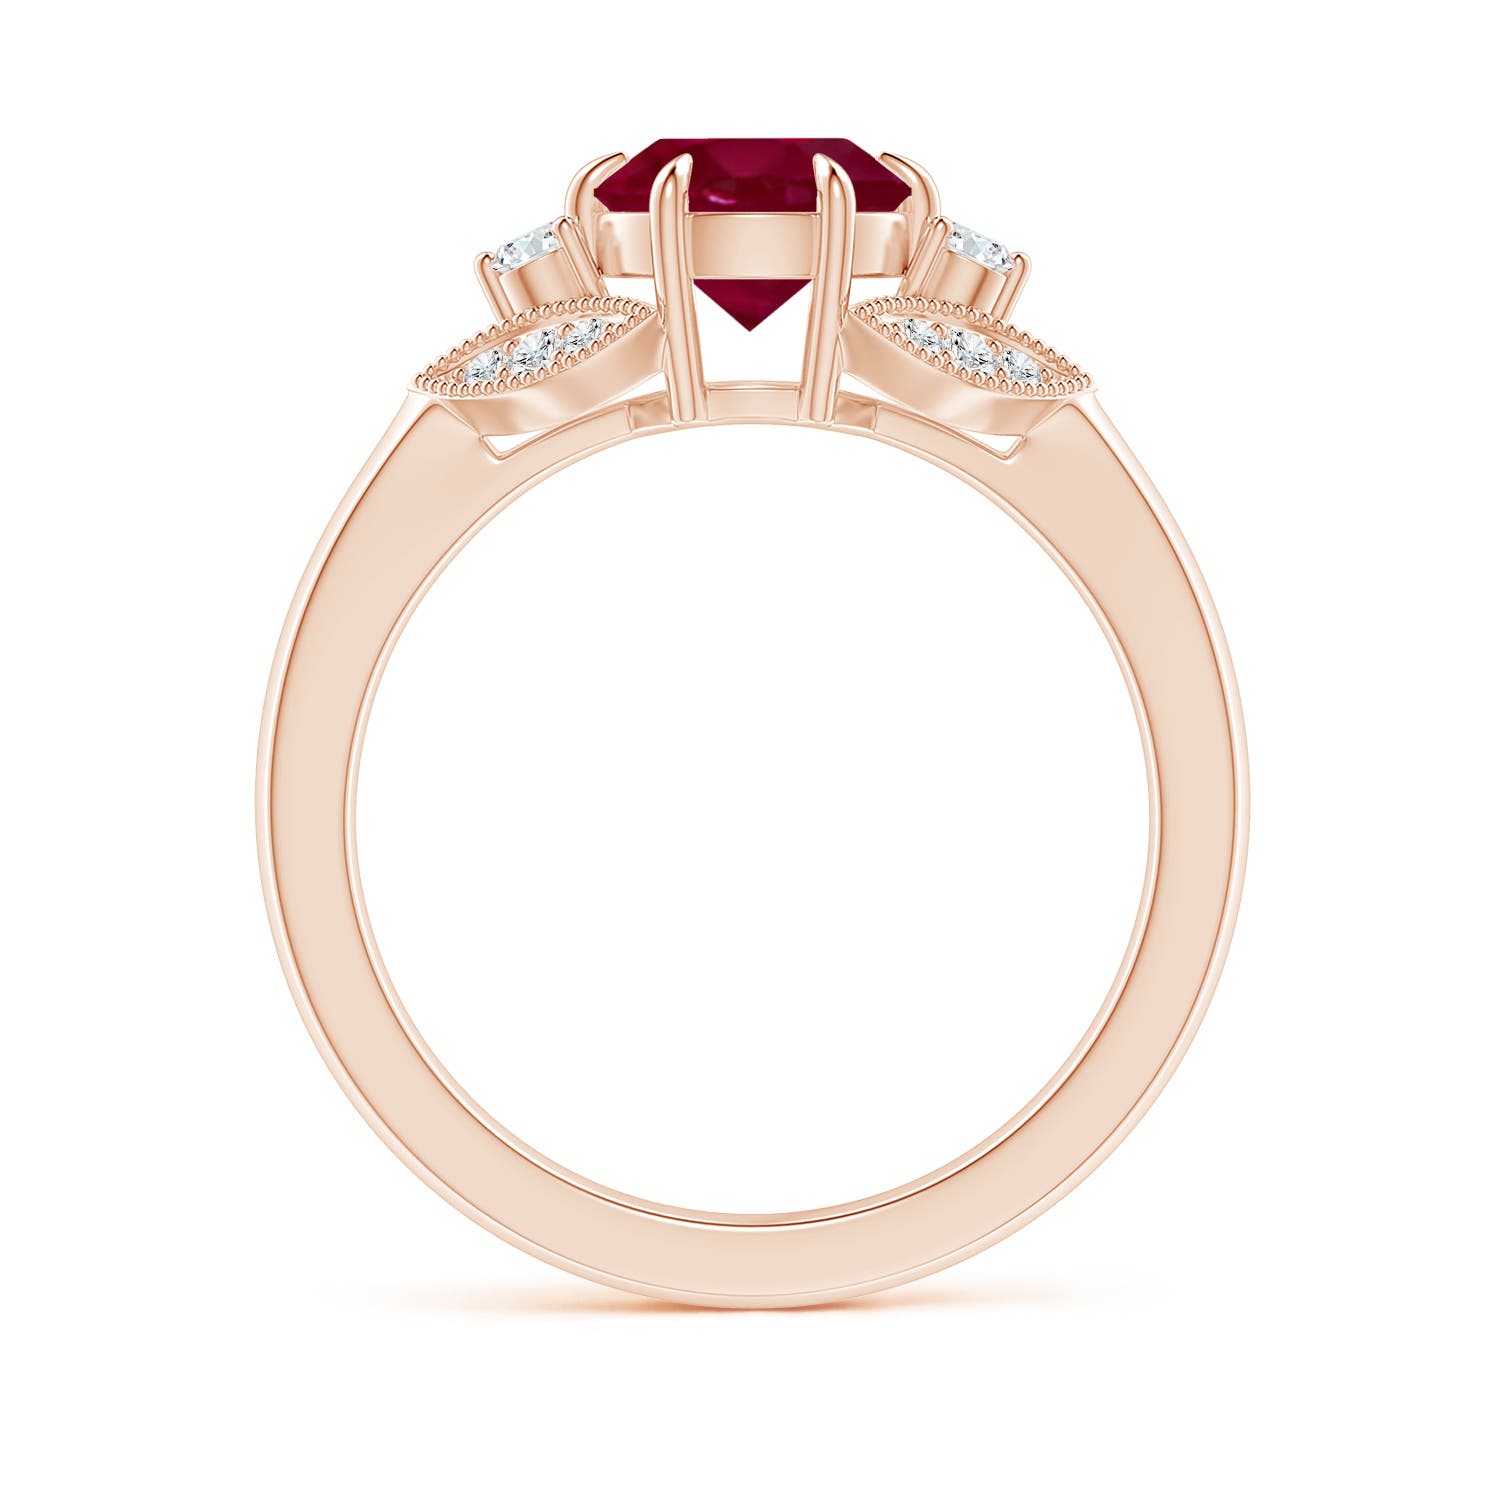 A - Ruby / 1.64 CT / 14 KT Rose Gold